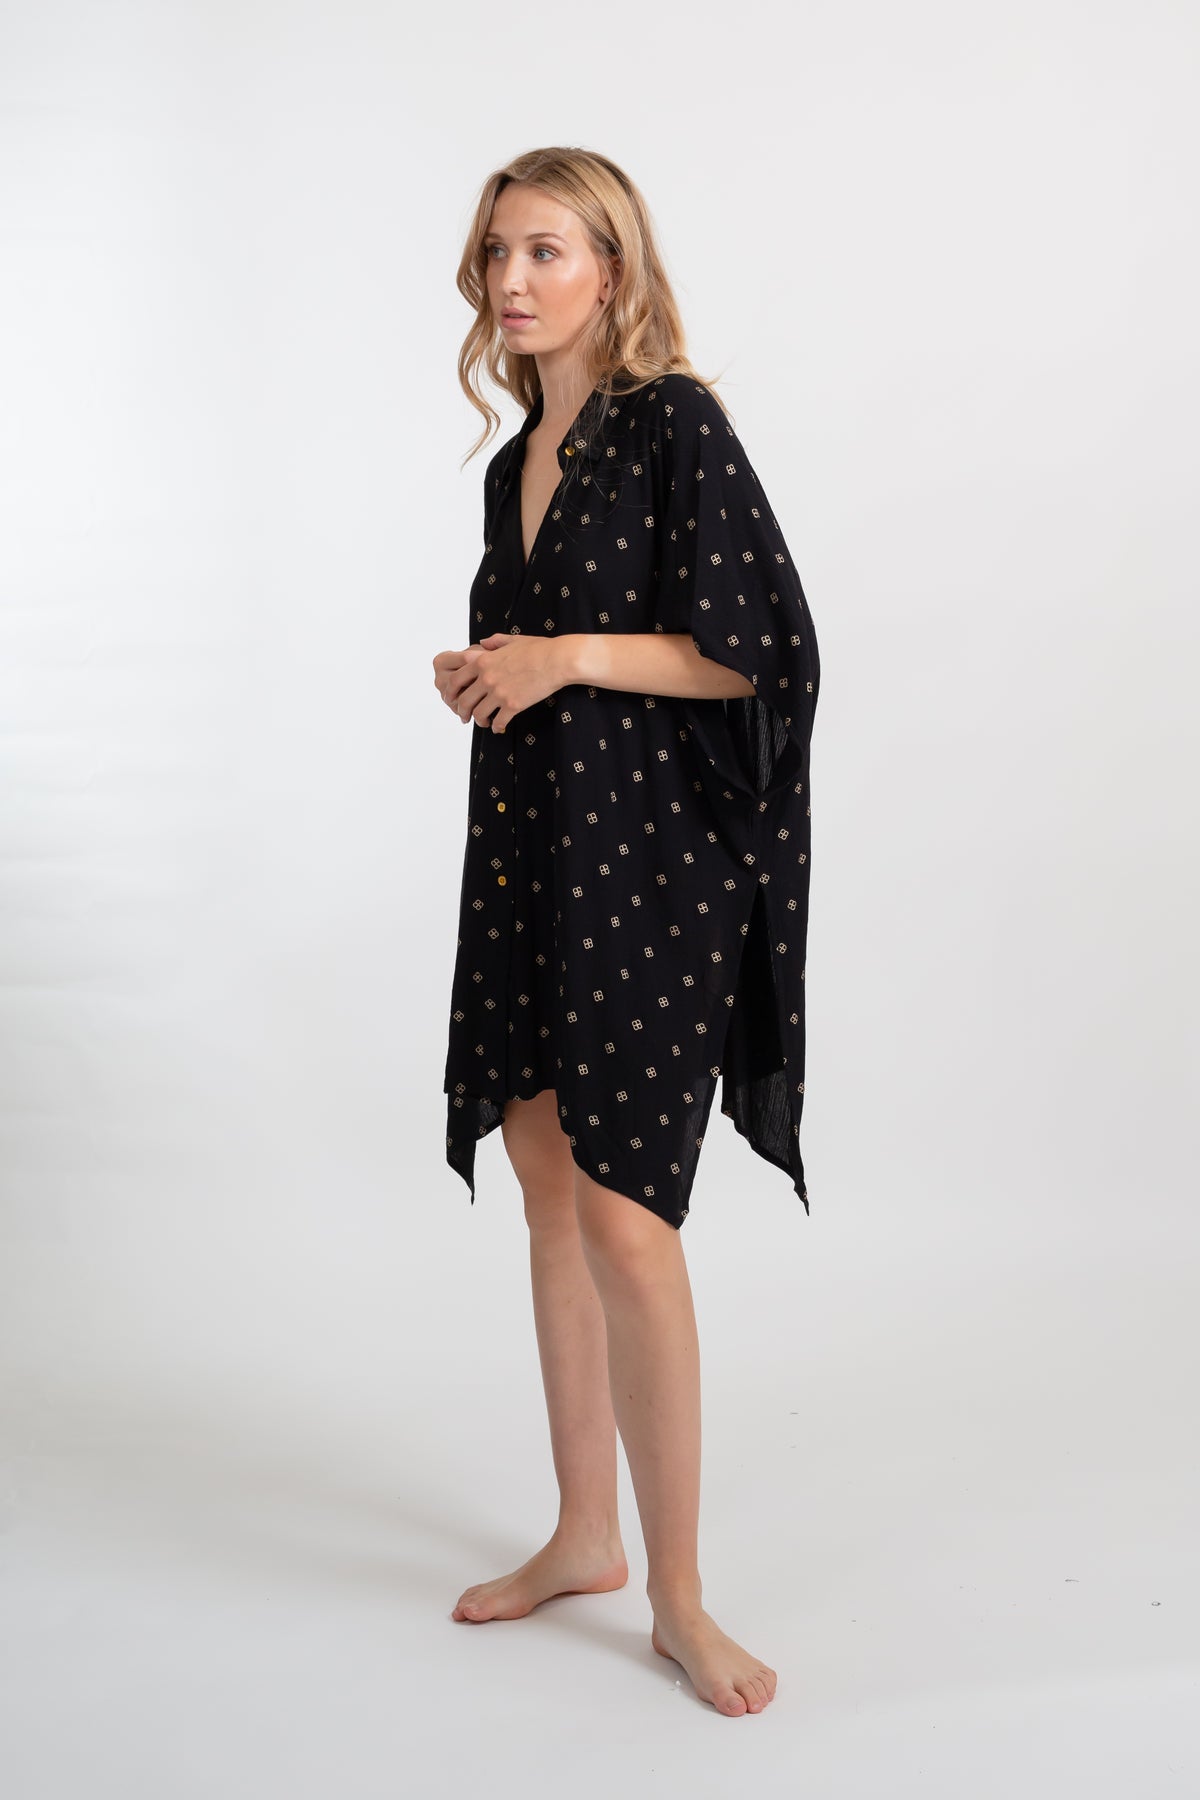 a side shot of a blonde hair female model wearing an oversized black with gold dot print shirt dress